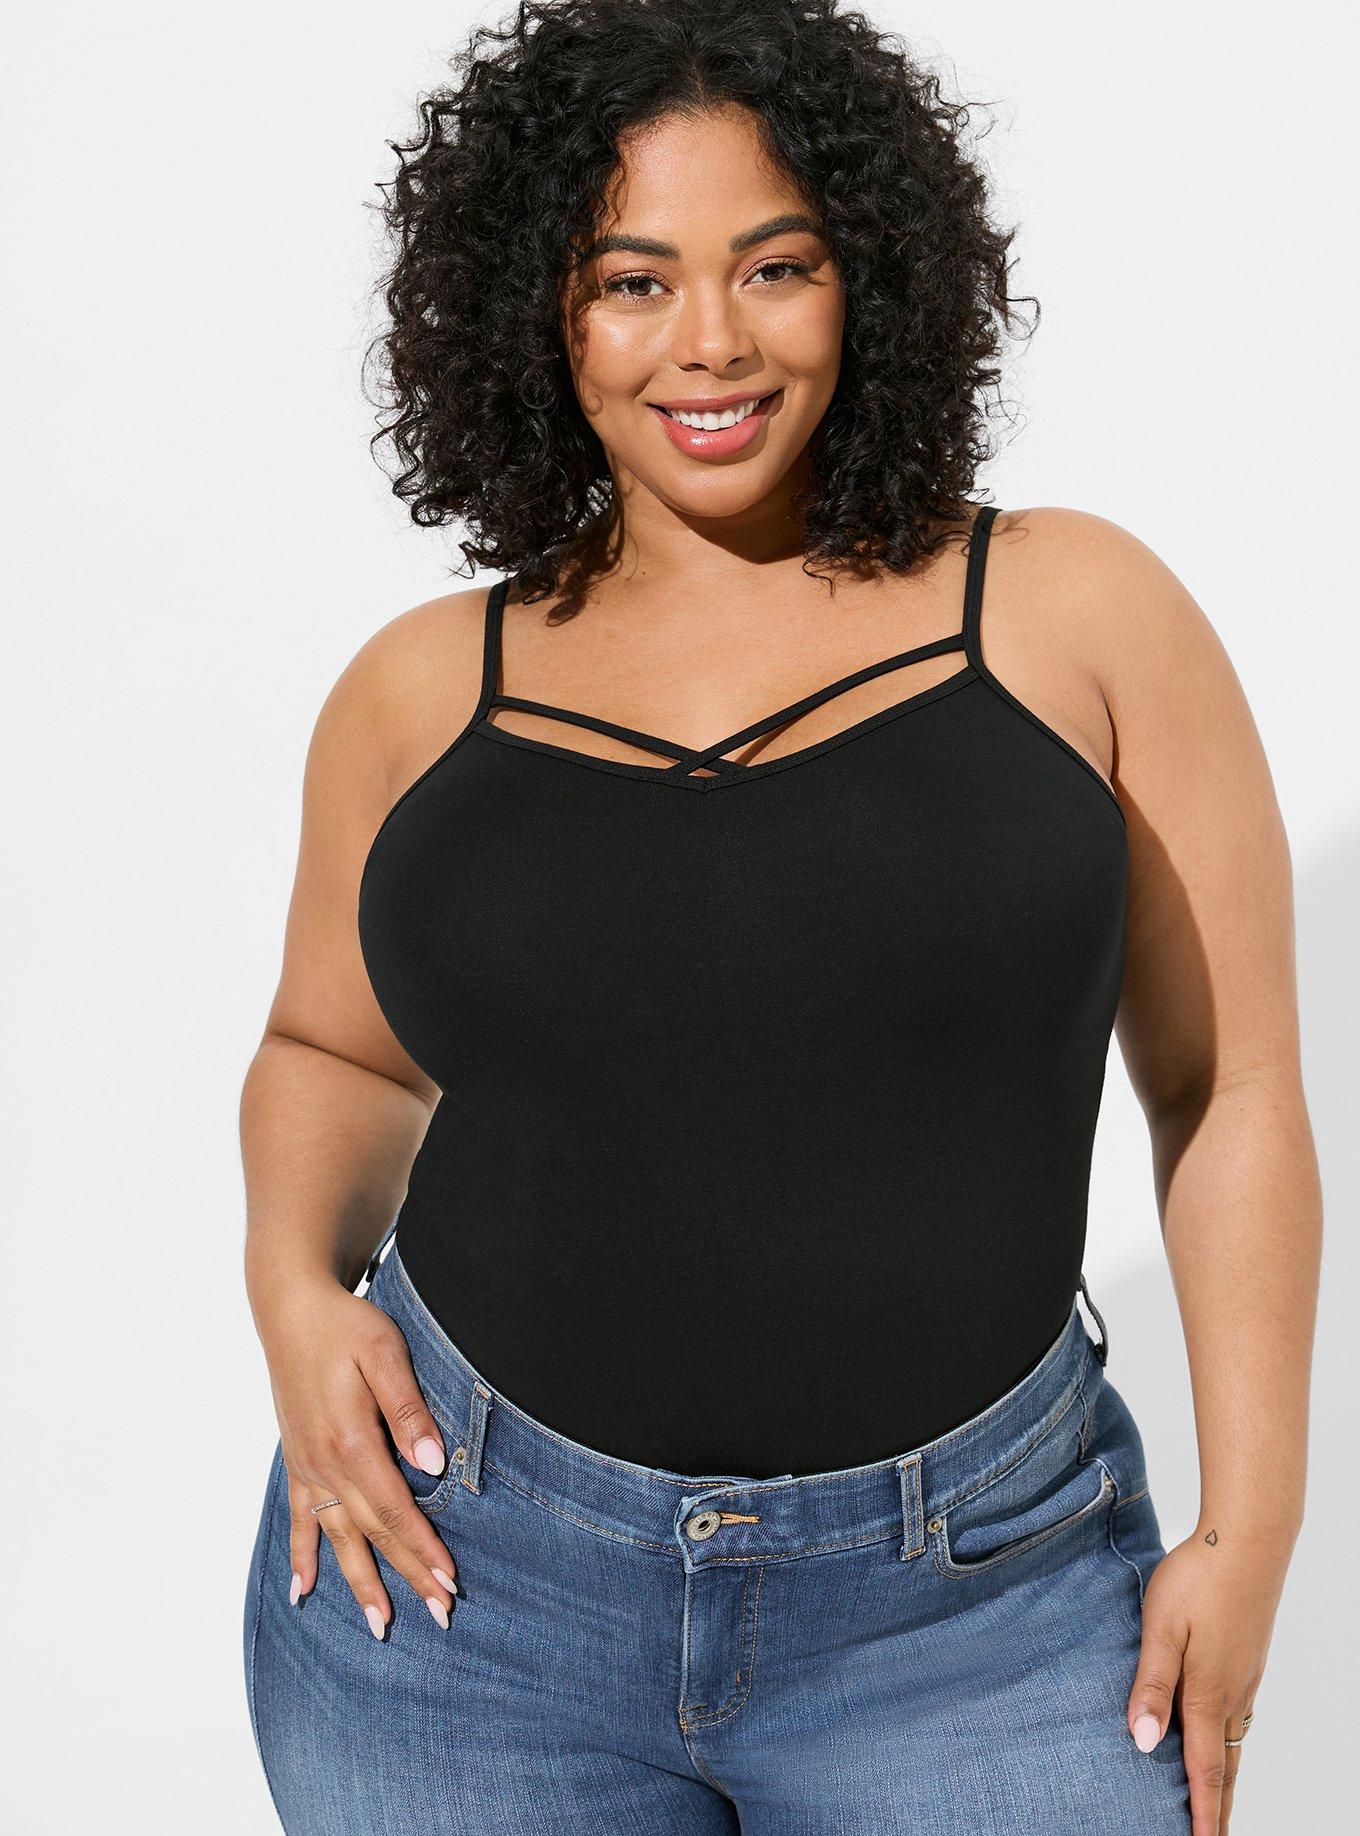 Foxy Strappy Cami  Plus size tank tops, Top outfits, Plus size